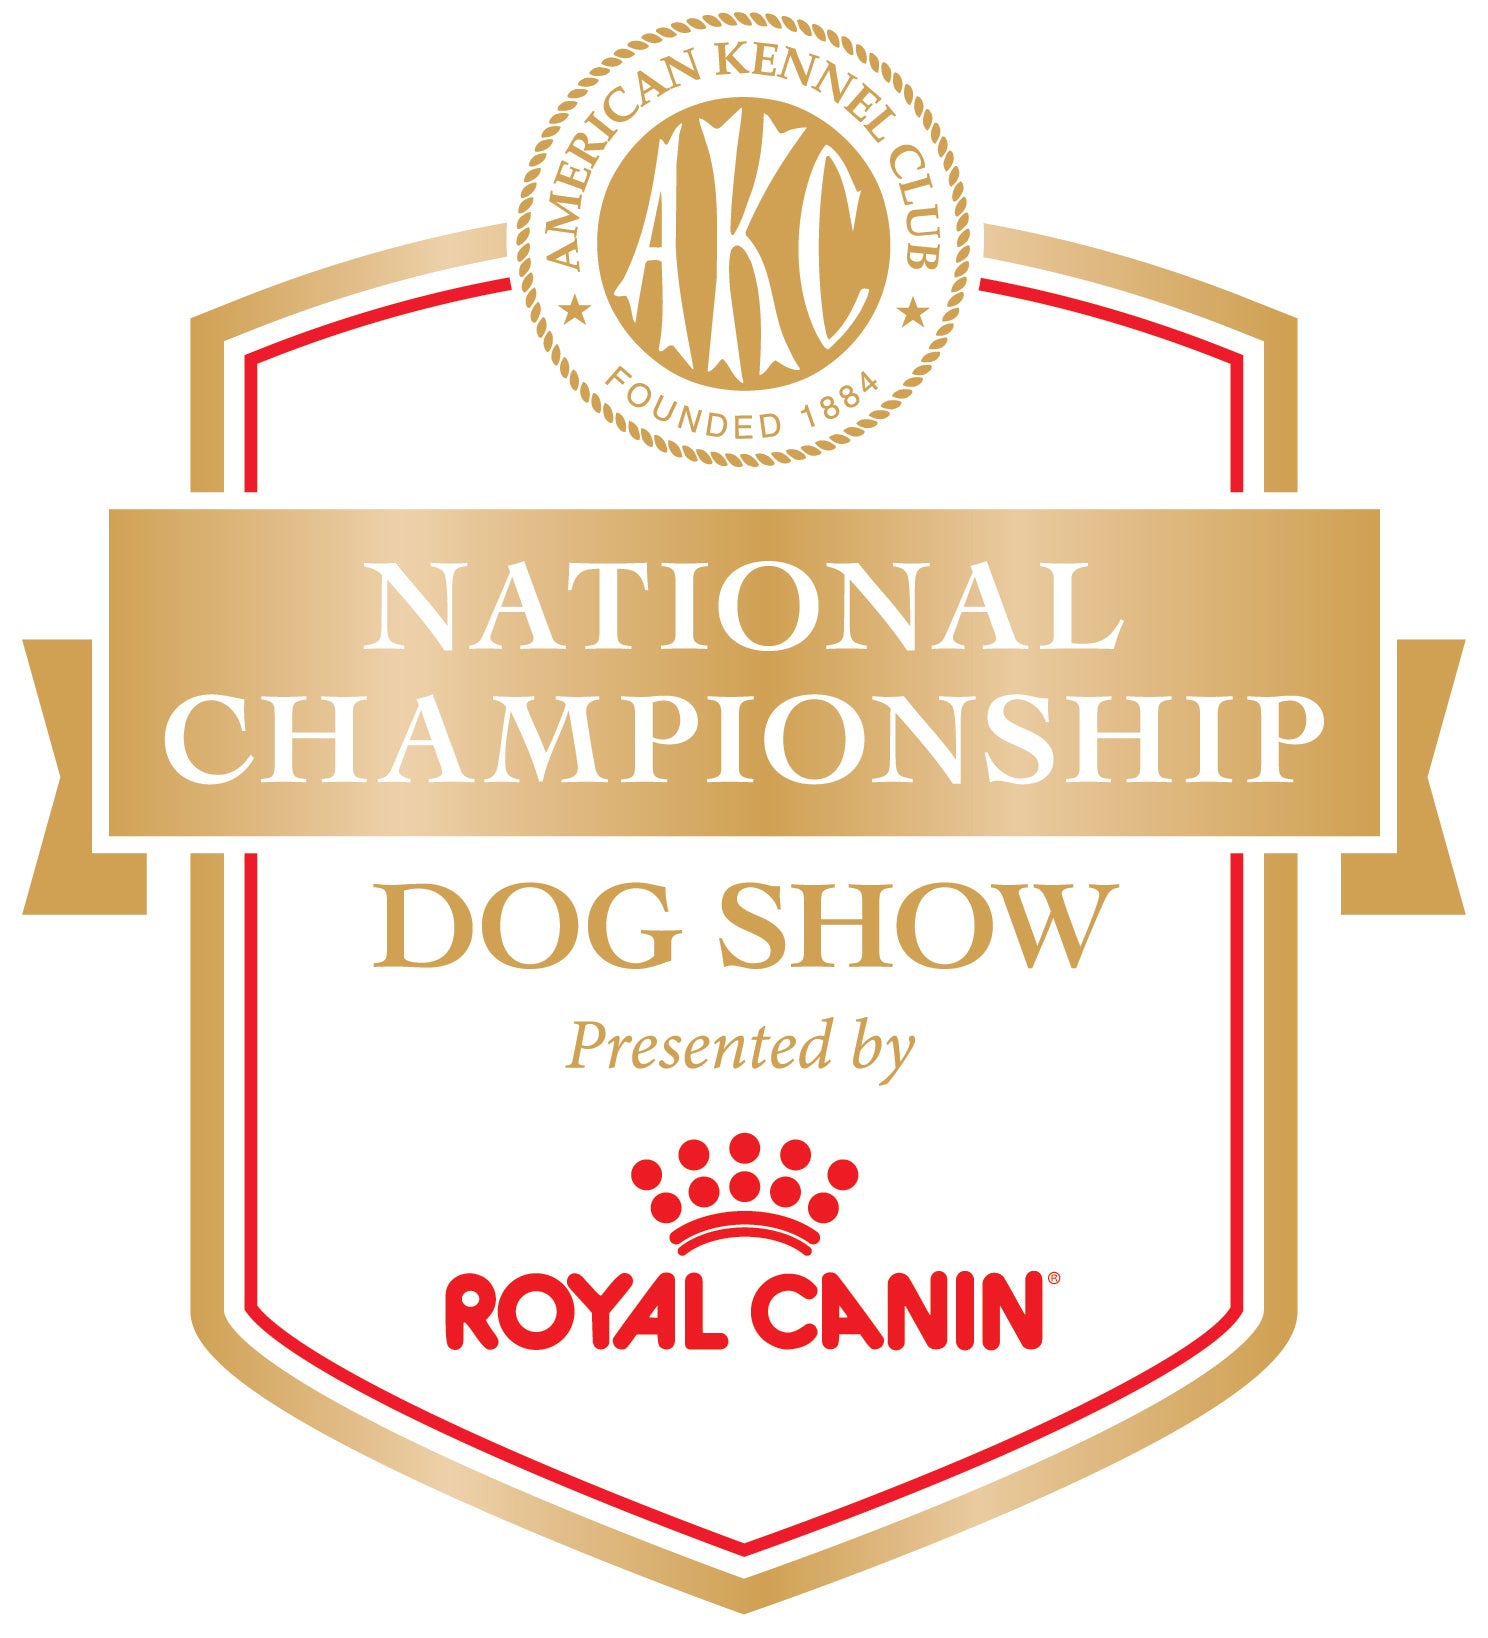 AKC National Championship presented by Royal Canin American Kennel Club